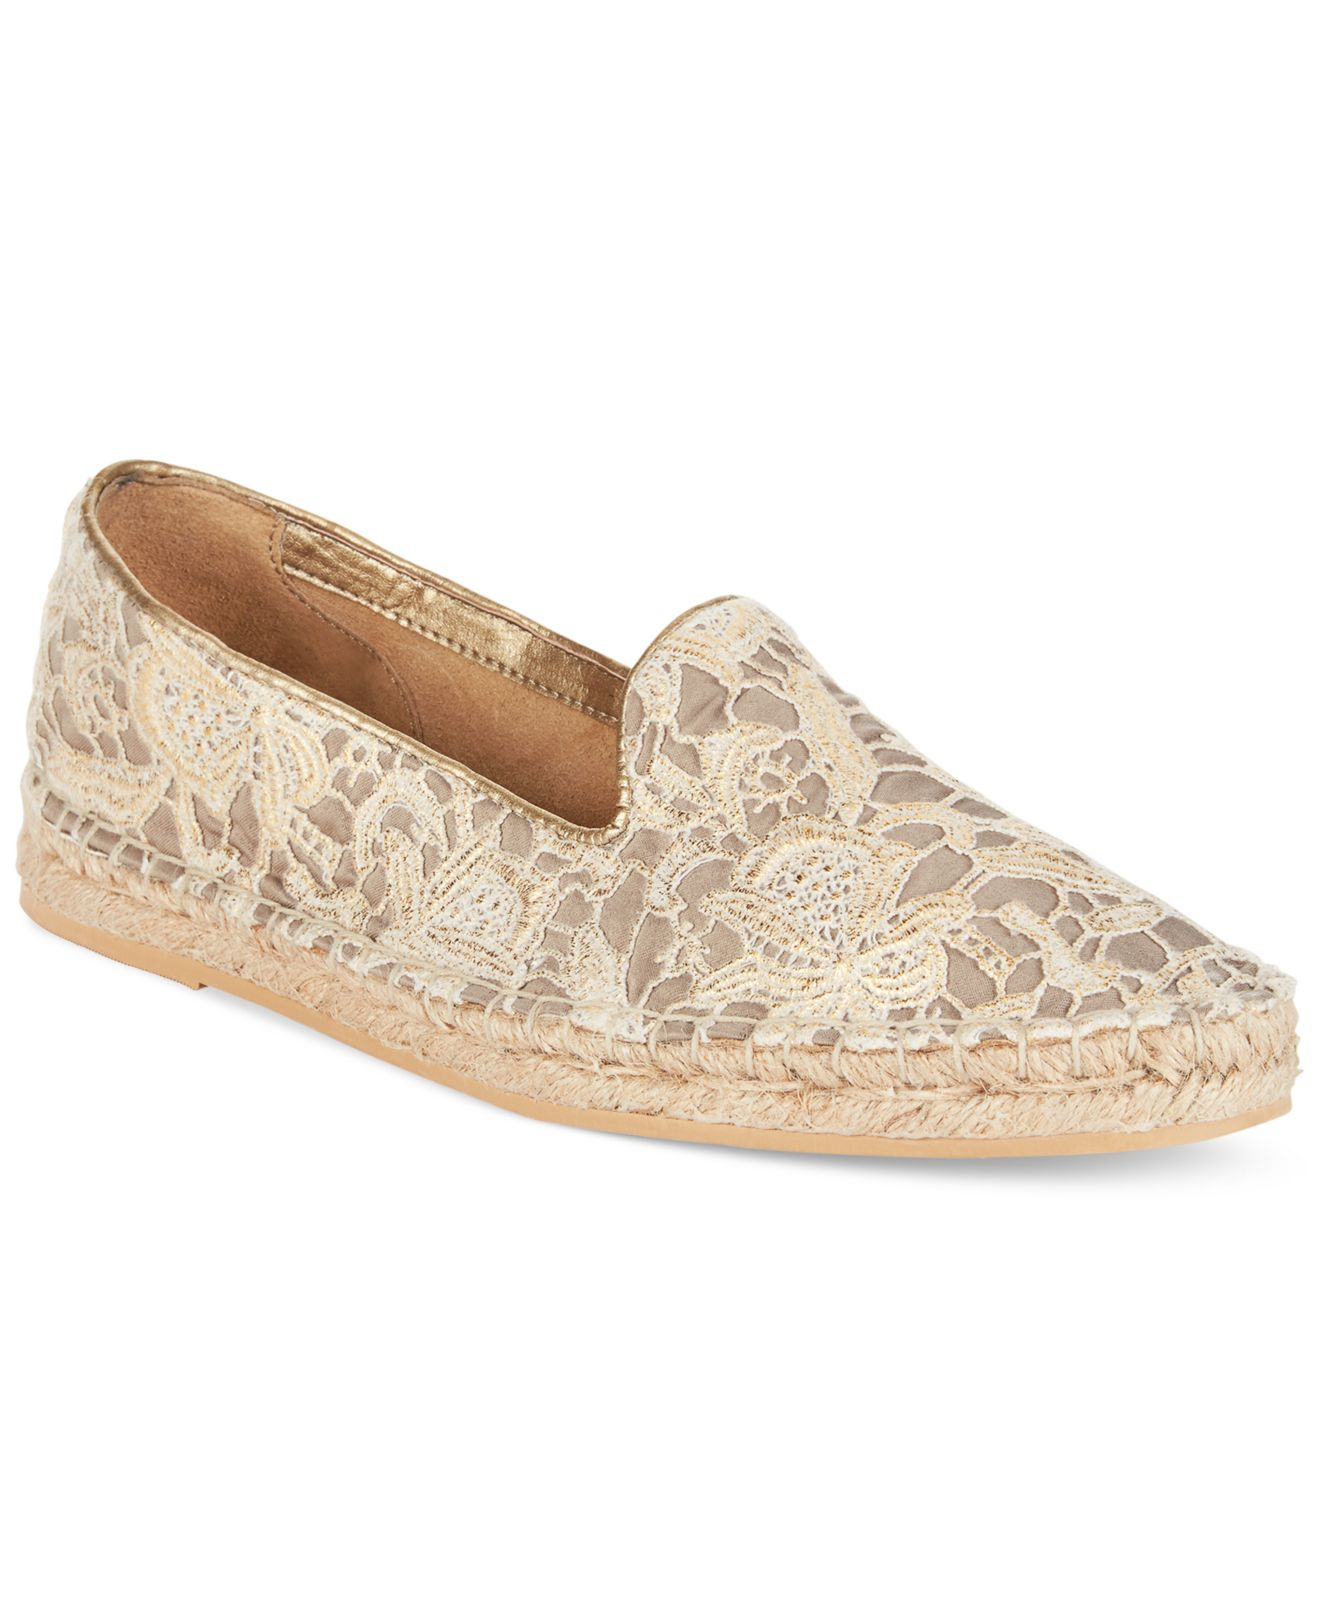 Cole haan Women'S Palermo Espadrille Flats in Natural | Lyst